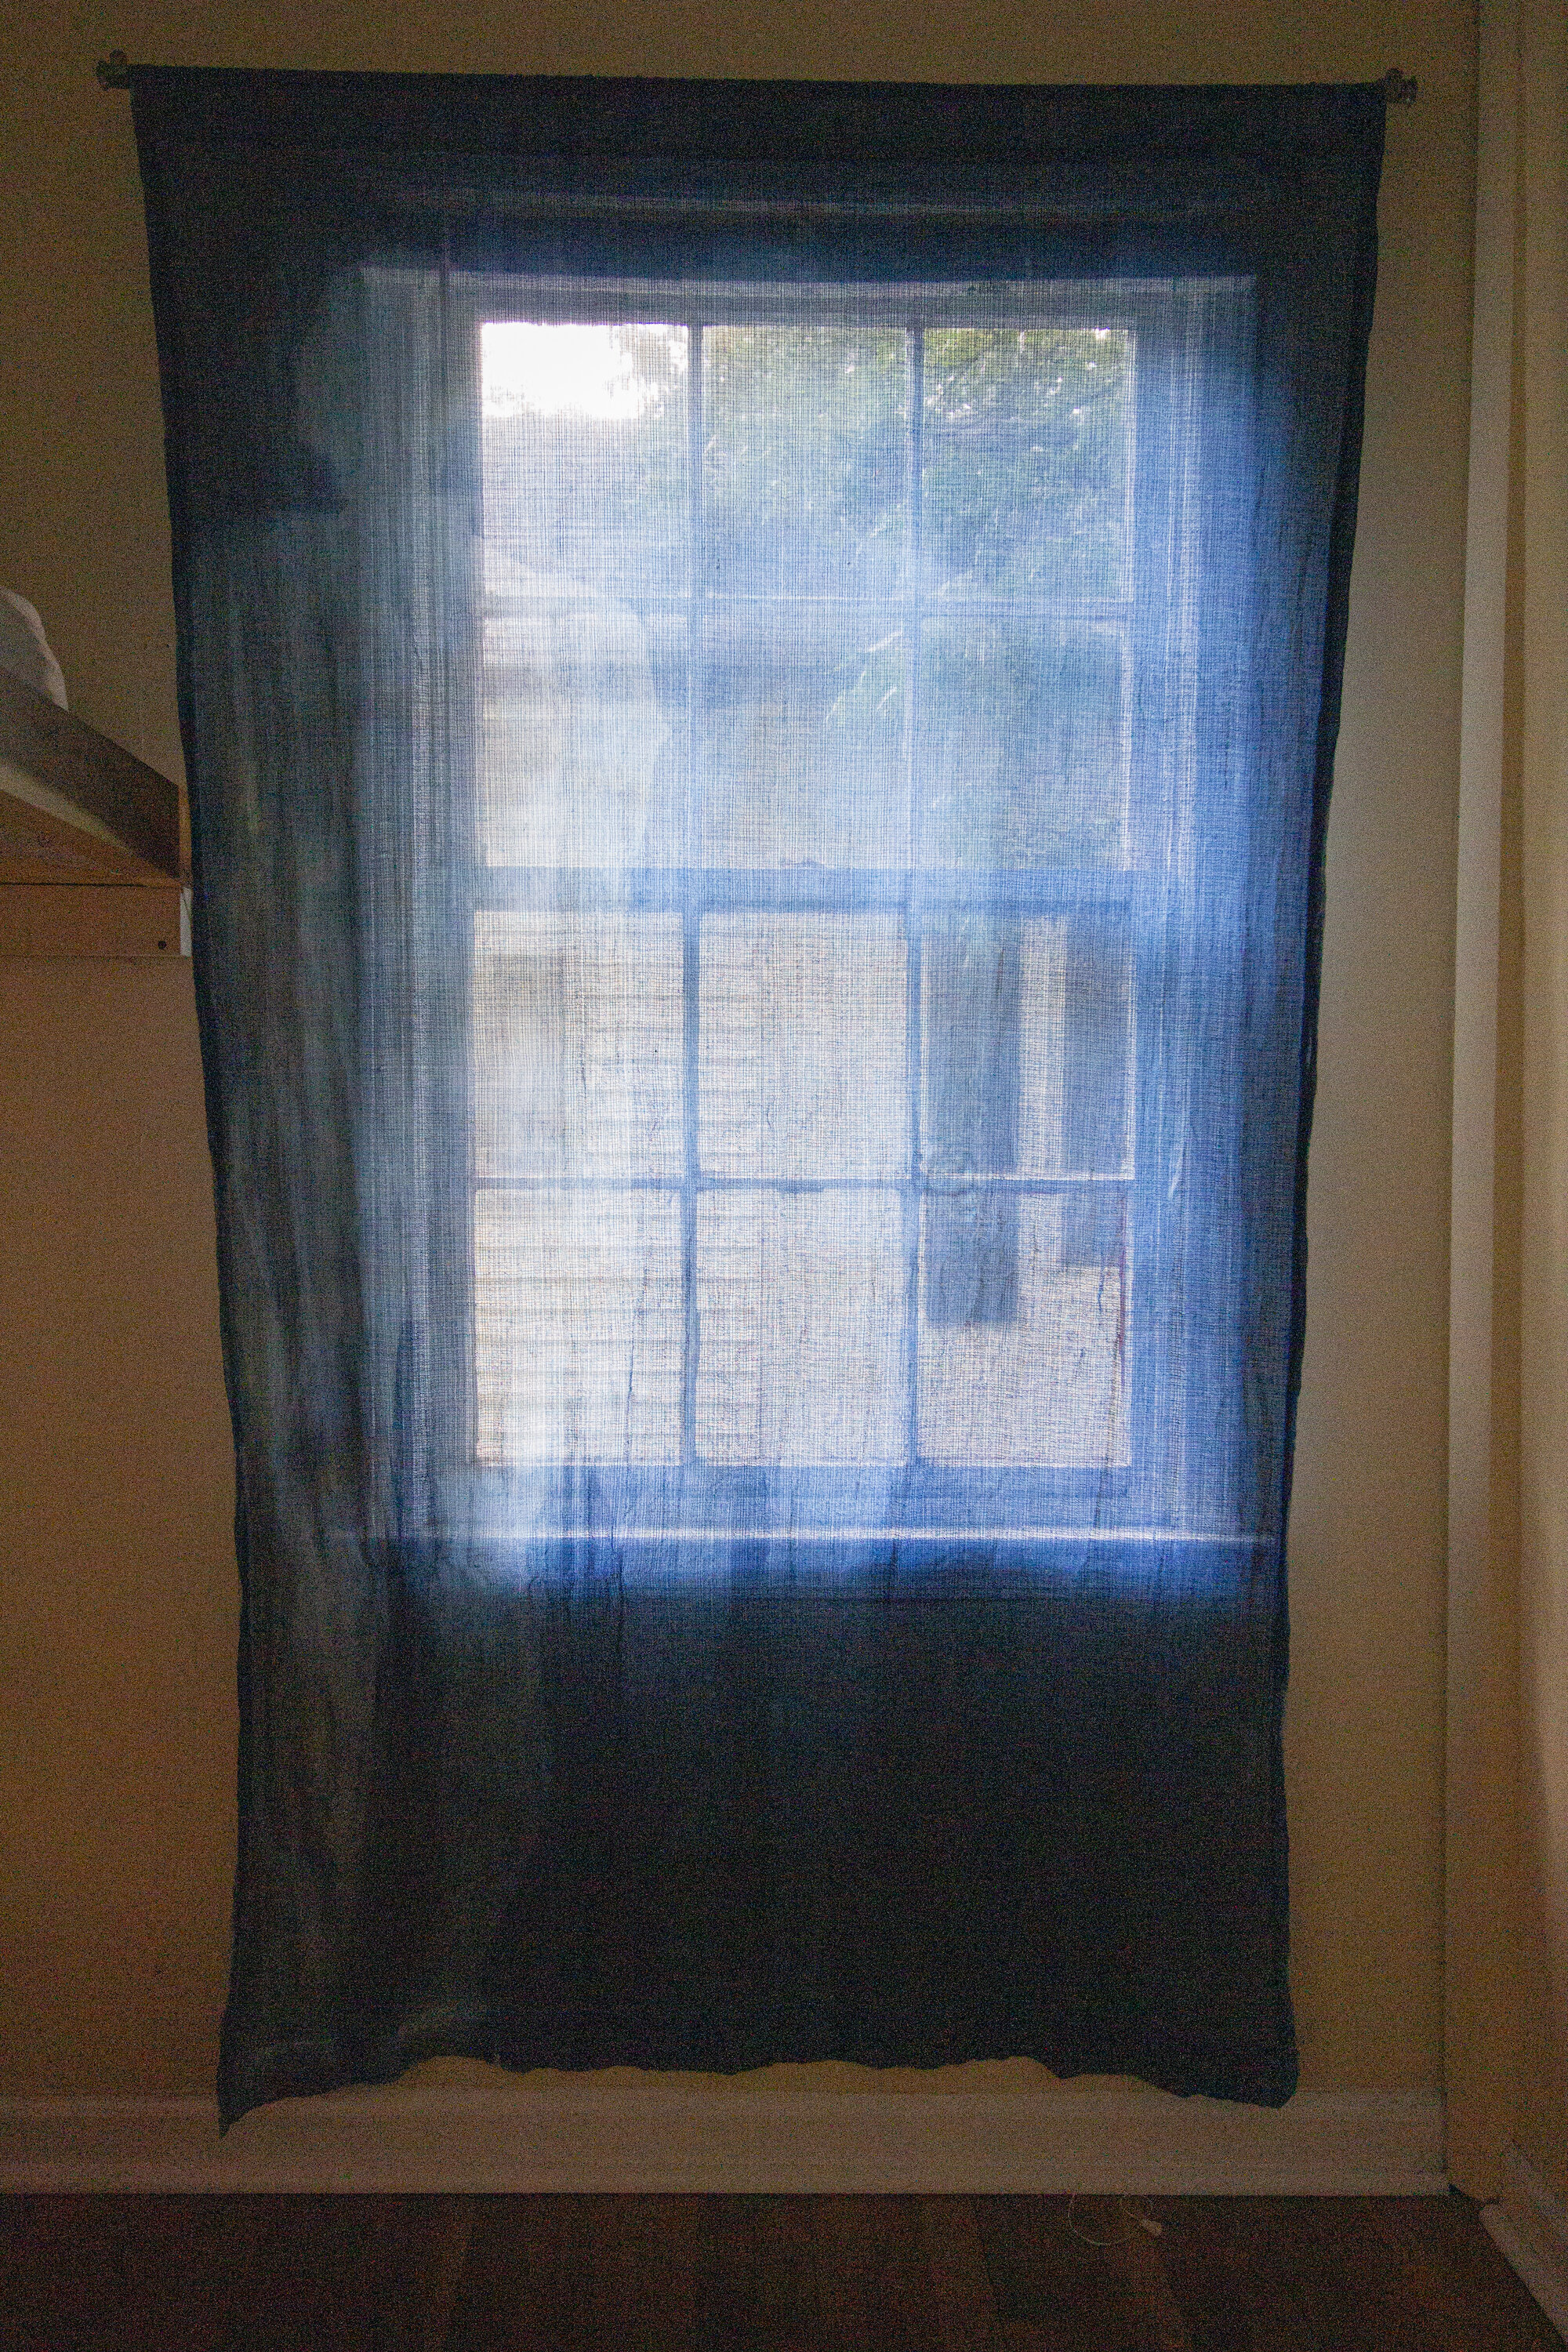 Unfolding [late afternoon], 2020, cotton curtain, cyanotype solution, curtain rod, and hardware, 55 x 84 inches